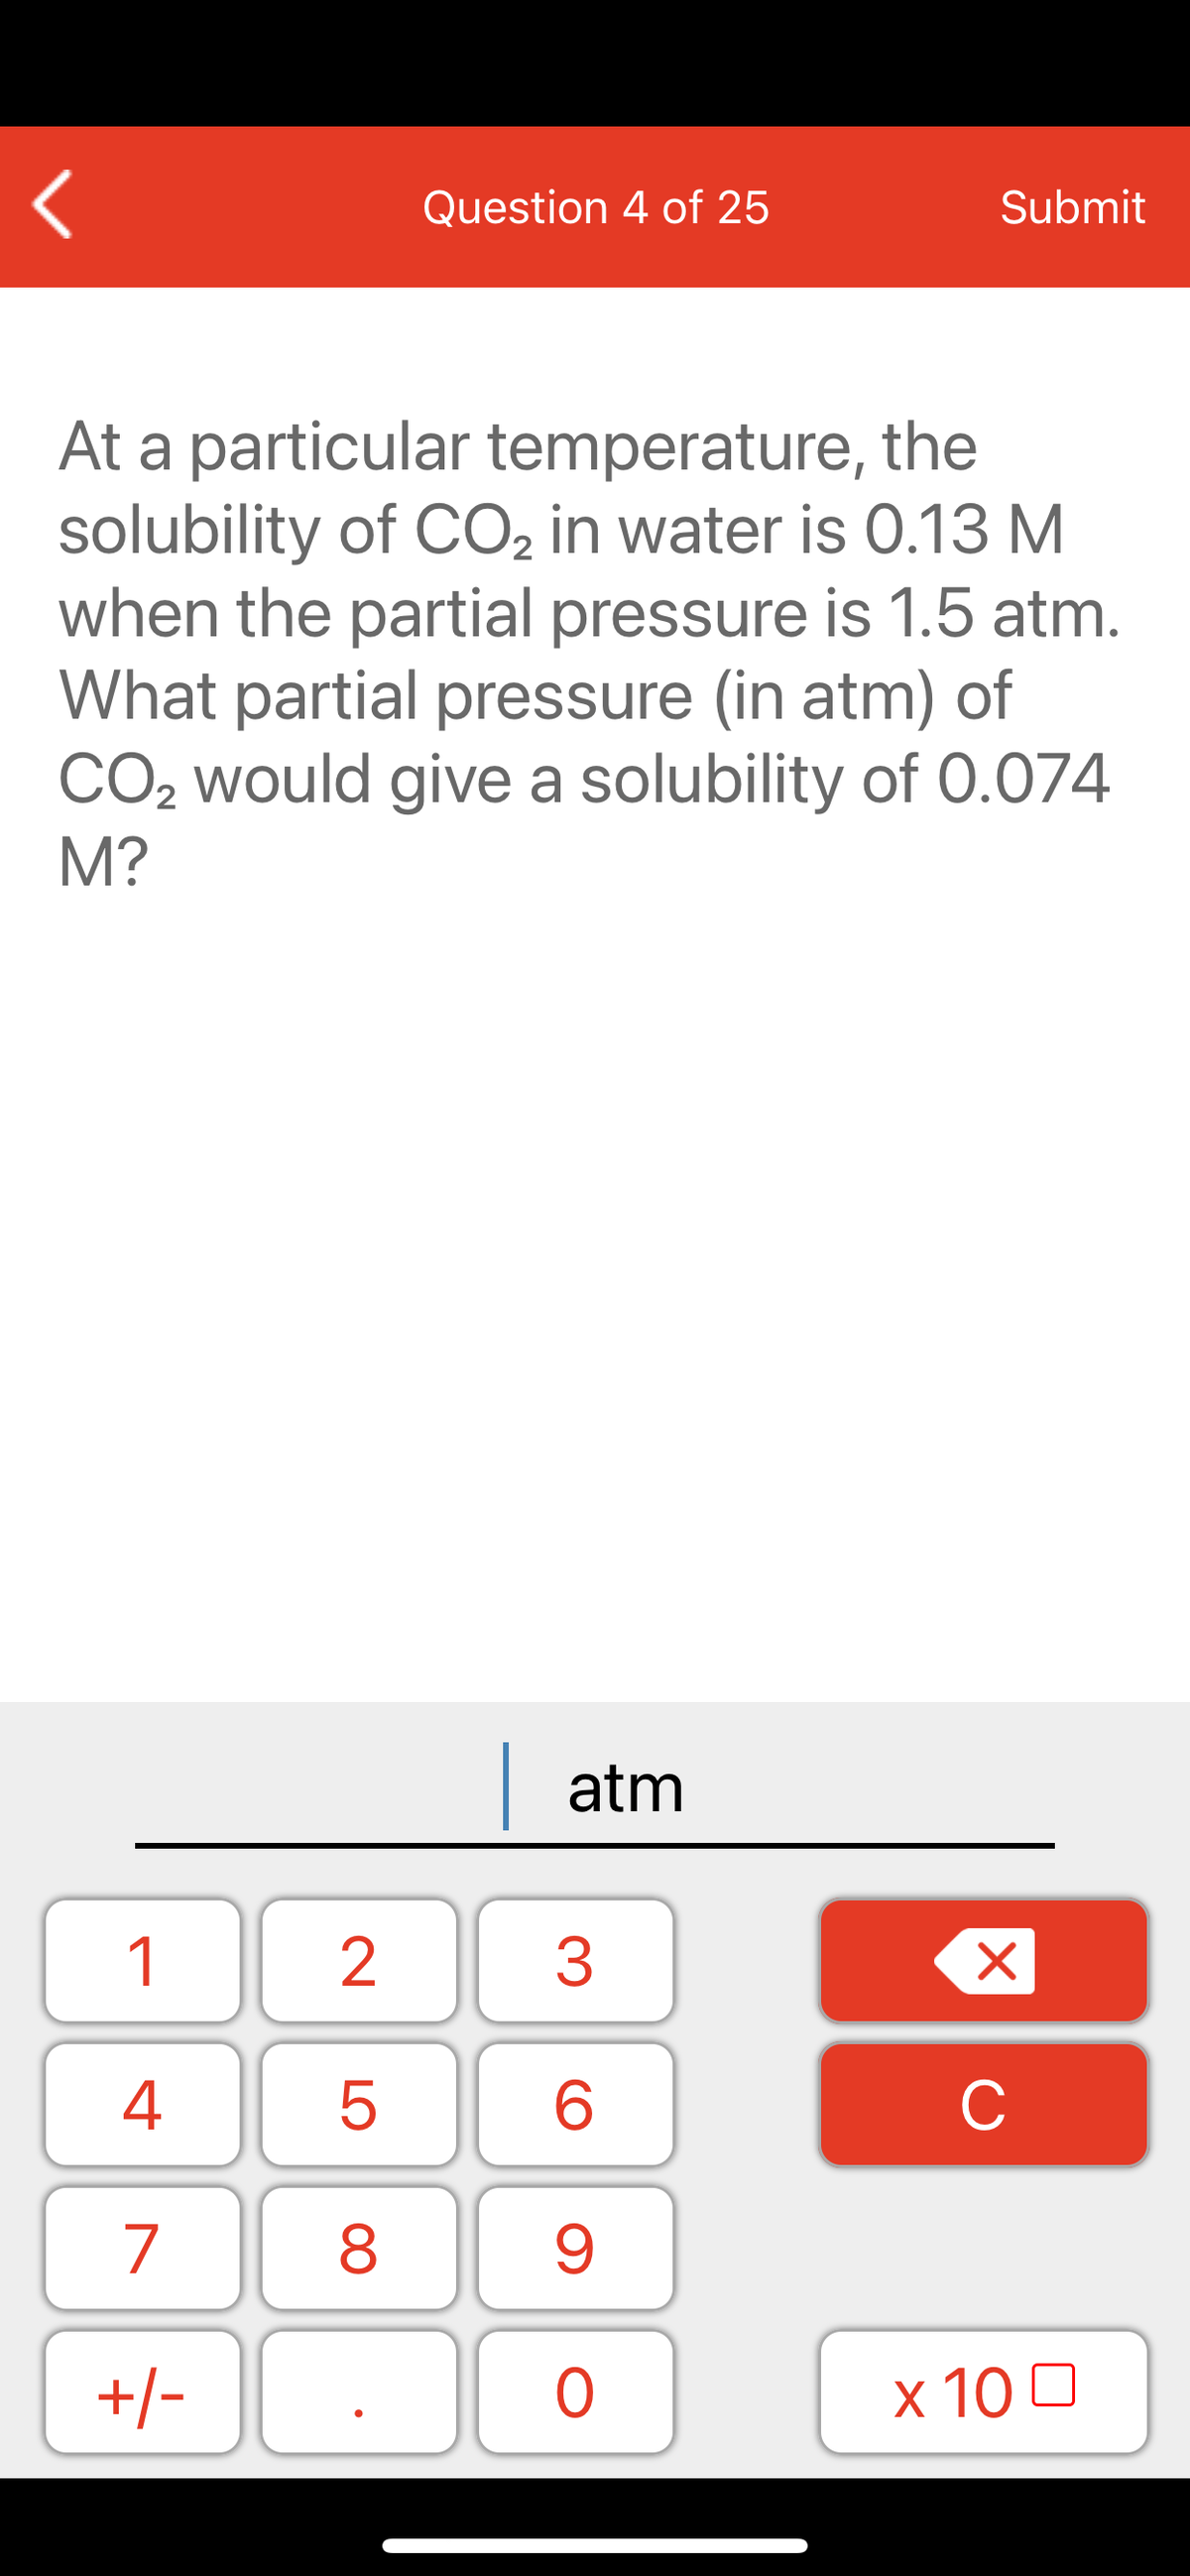 Question 4 of 25
Submit
At a particular temperature, the
solubility of CO2 in water is 0.13 M
when the partial pressure is 1.5 atm.
What partial pressure (in atm) of
CO2 would give a solubility of 0.074
M?
| atm
1
2
3
C
7
9.
+/-
x 10 0
LO
00
